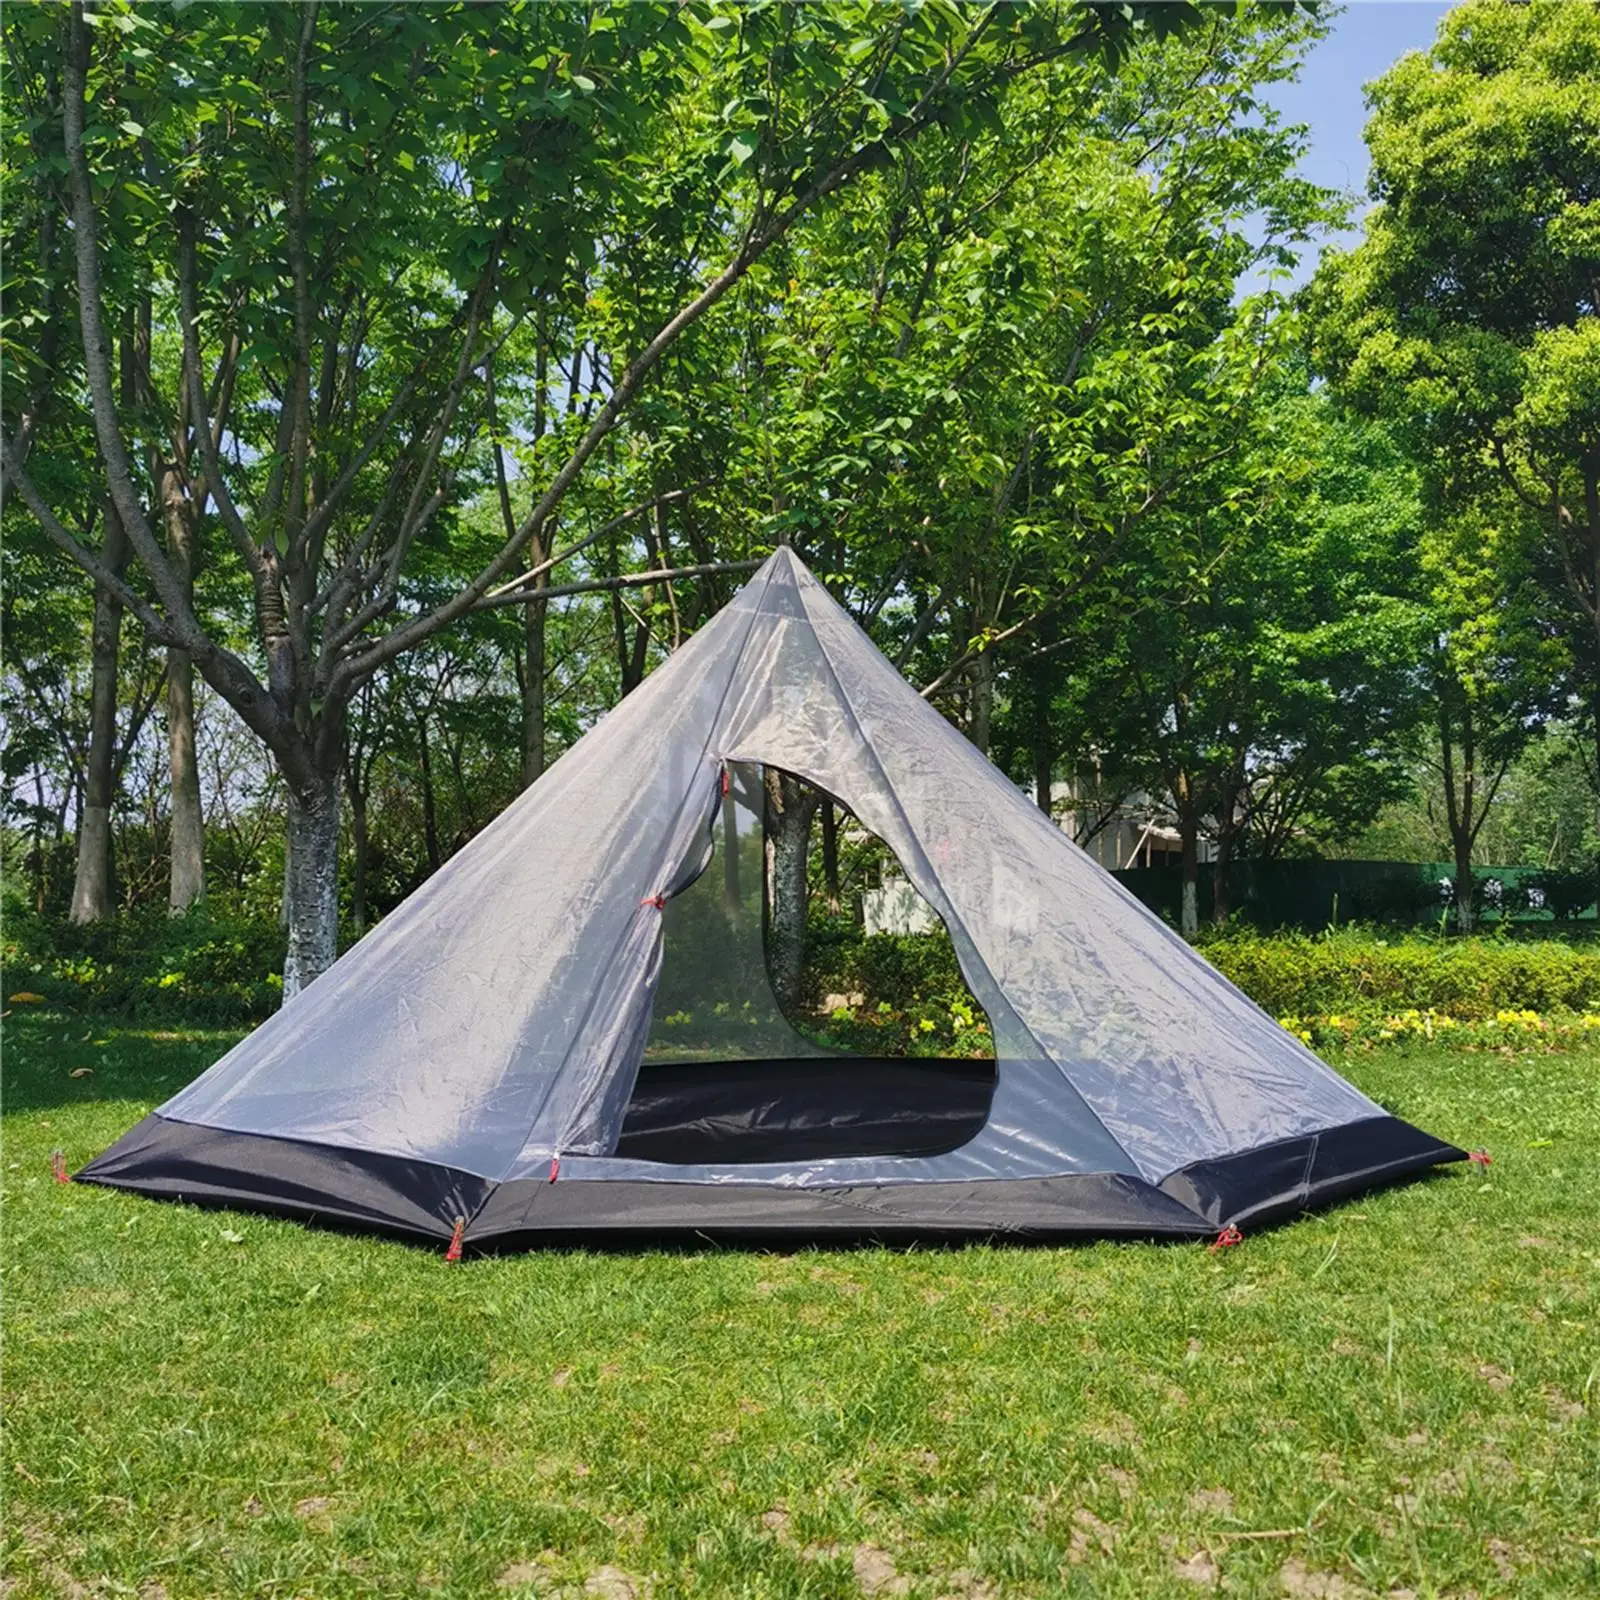 Camping Teepee Inner Tent Summer Mesh Tent for Backpacking Hiking 1-2 Person